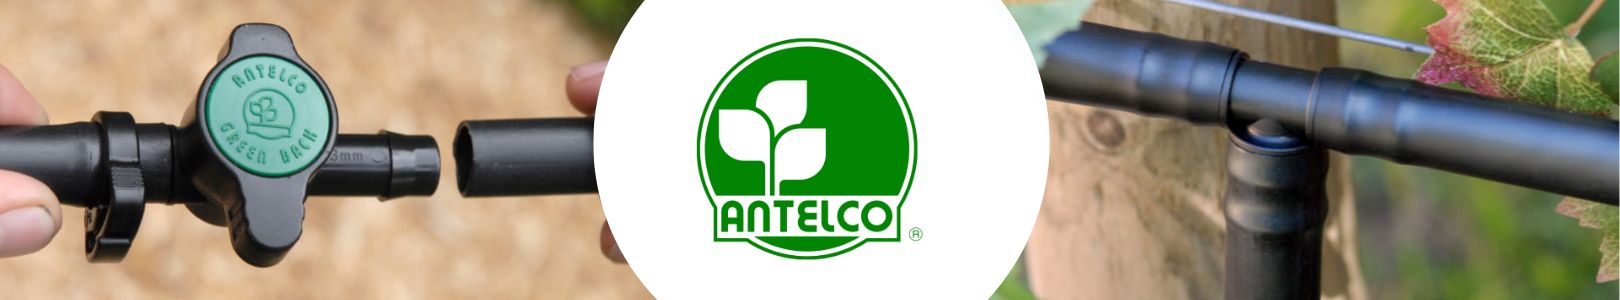 <p style="text-align: center;">Noticing a need for efficient water distribution, Antelco was established in 1985 in Murray Bridge, South Australia.</p>
<p style="text-align: center;">Today, Antelco is known world wide for their most innovative, top quality drippers, sprays, sprinklers and fittings in the irrigation industry.</p>
<p style="text-align: center;">All Antelco products undergo rigorous field testing and quality control measures so that any faults or imperfections can be engineered out, <br>resulting in fault-free, quality products for home owners, landscapers and agricultural markets promoting responsible water use.</p>